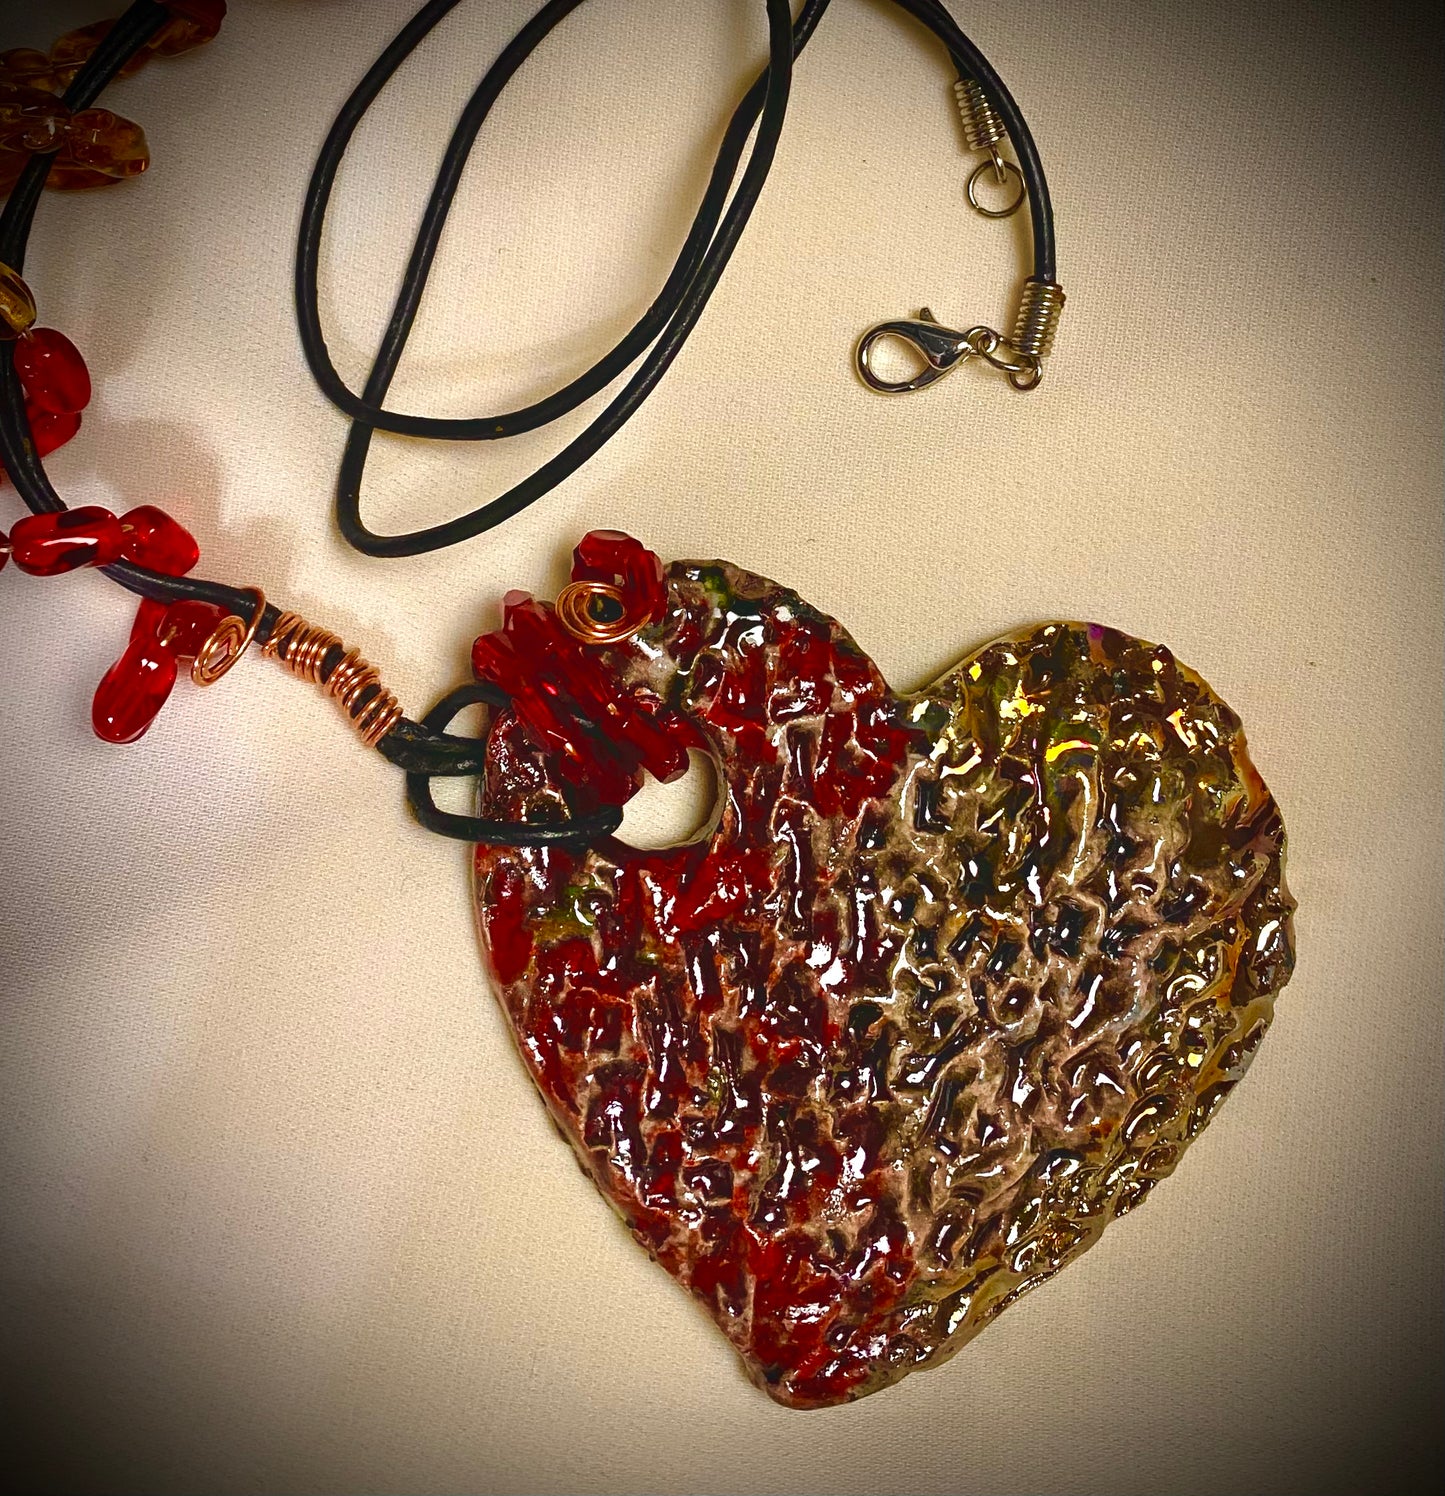 Have A Heart ! Each heart pendant is handmade with love! It is 3"x 3" and weighs approx. 3ozs. This pendant has a red and gold metallic raku glazes that renders a unique translucent  patina. The heart has a textured pattern . It holds a spiral of amber and red mini beads on a spiral copper wire. This pendant has a nice 12" black suede cord!